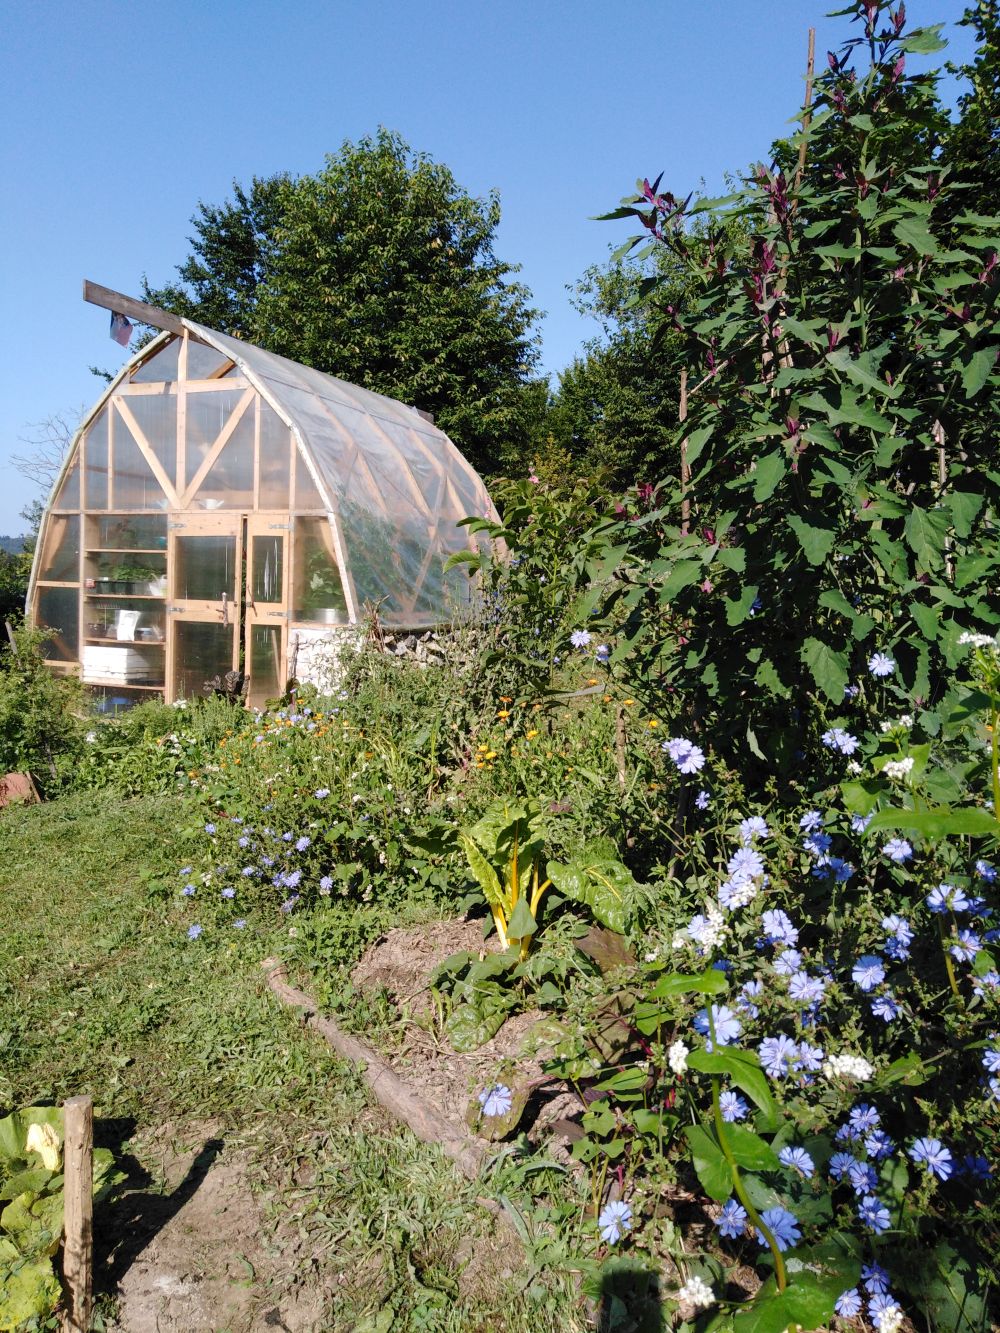 Greenhouse in the permaculture garden